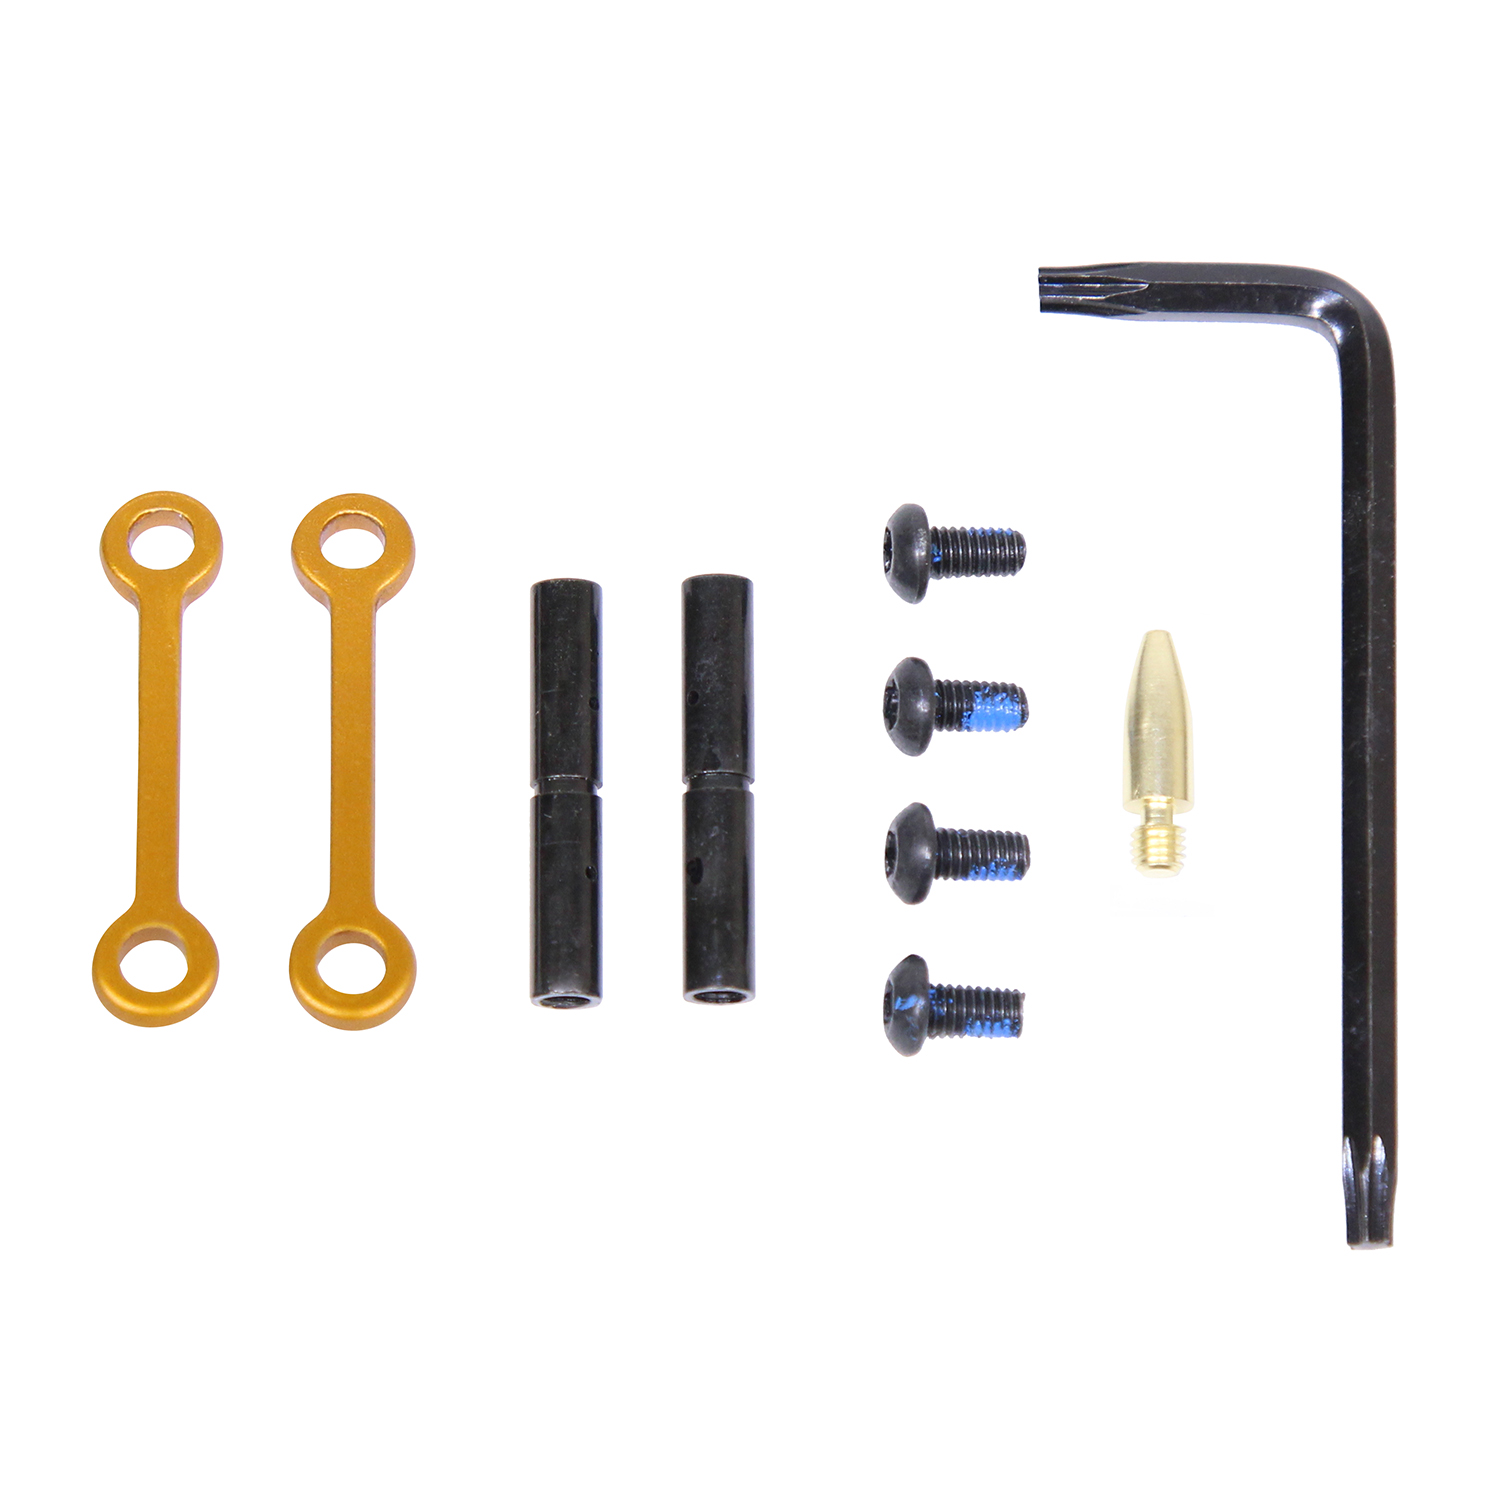 Armasepc Stainless Steel Anti-Walk Trigger/Hammer Pins - 717412, Lower  Receiver Parts & Trigger Kits at Sportsman's Guide